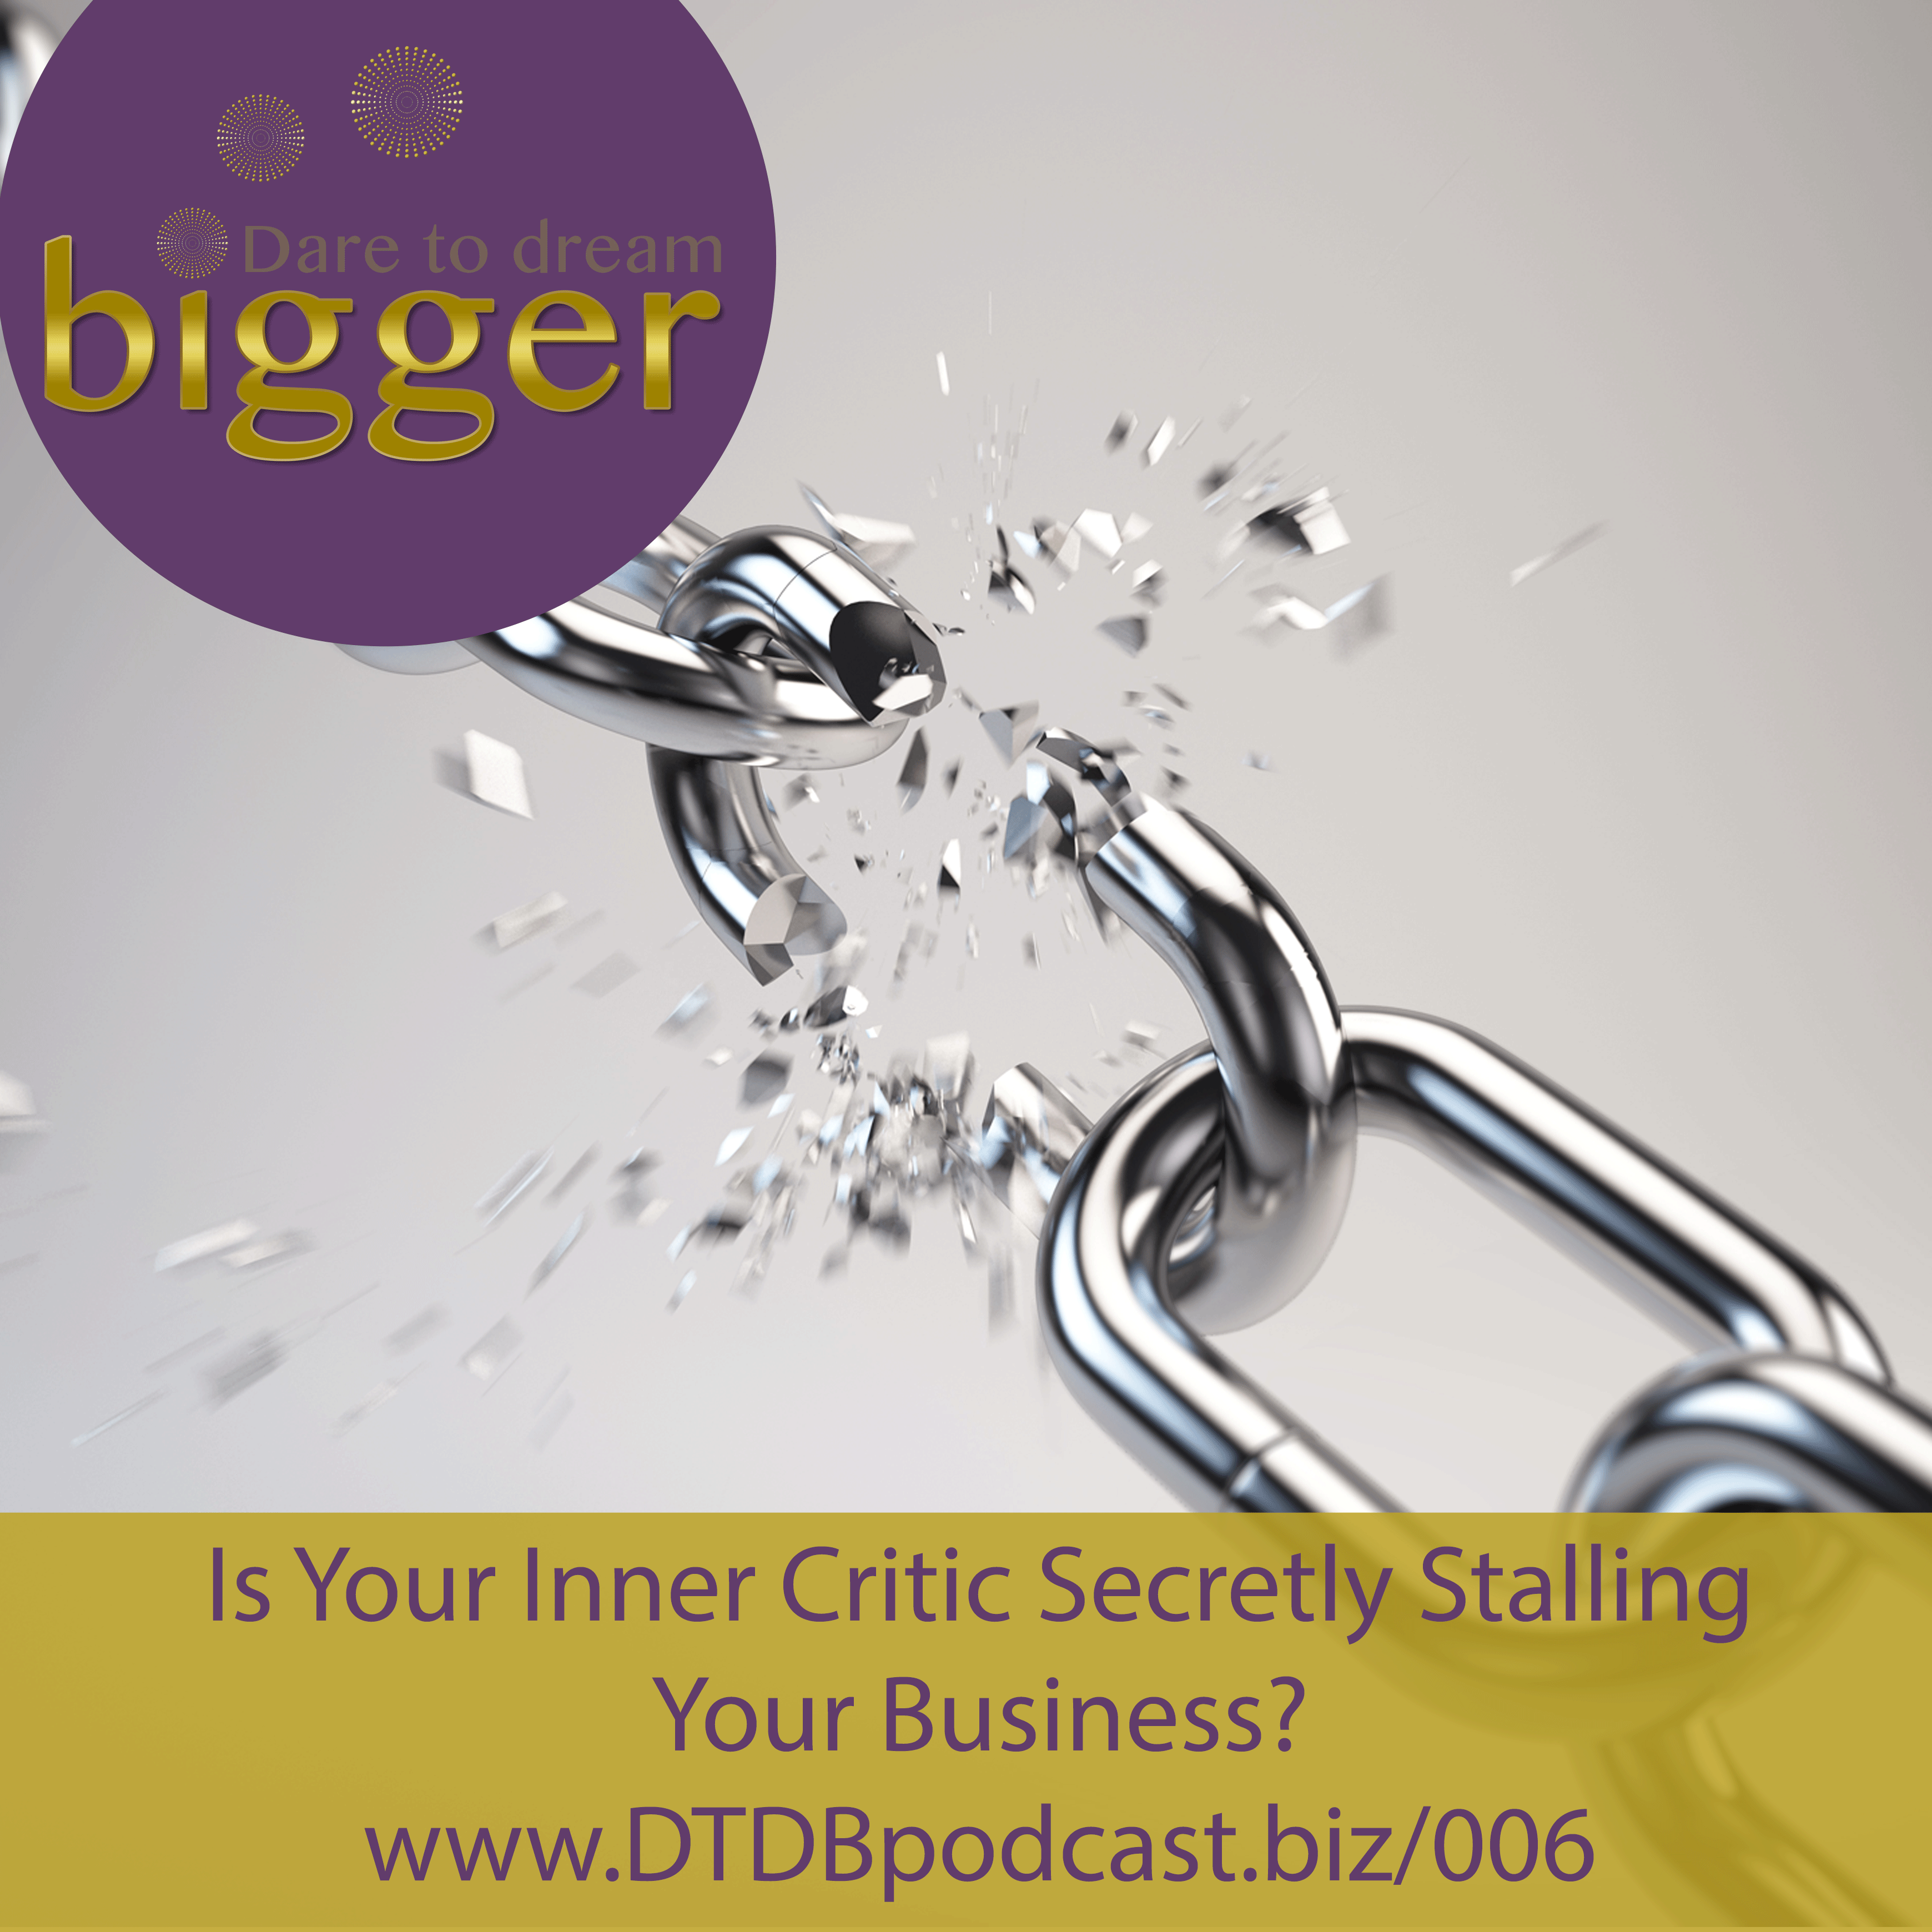 Dare To Dream Bigger Podcast: Is Your Inner Critic Secretly Stalling Your Business? http://www.dtdbpodcast.biz/006